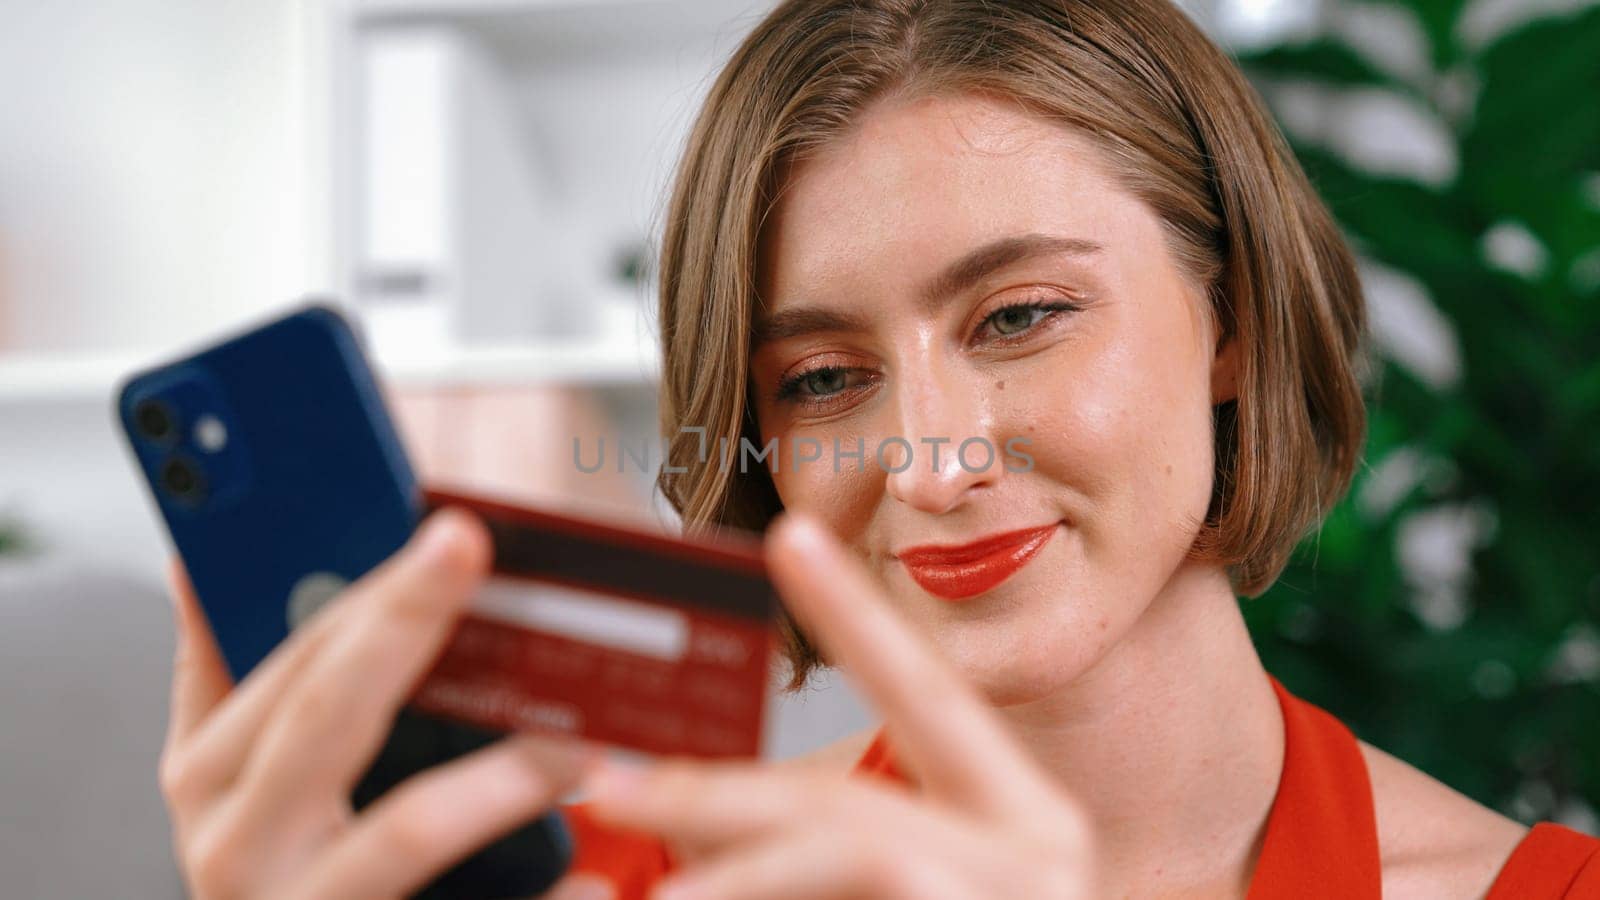 Woman shopping or pay bills online on internet prim shopping by biancoblue